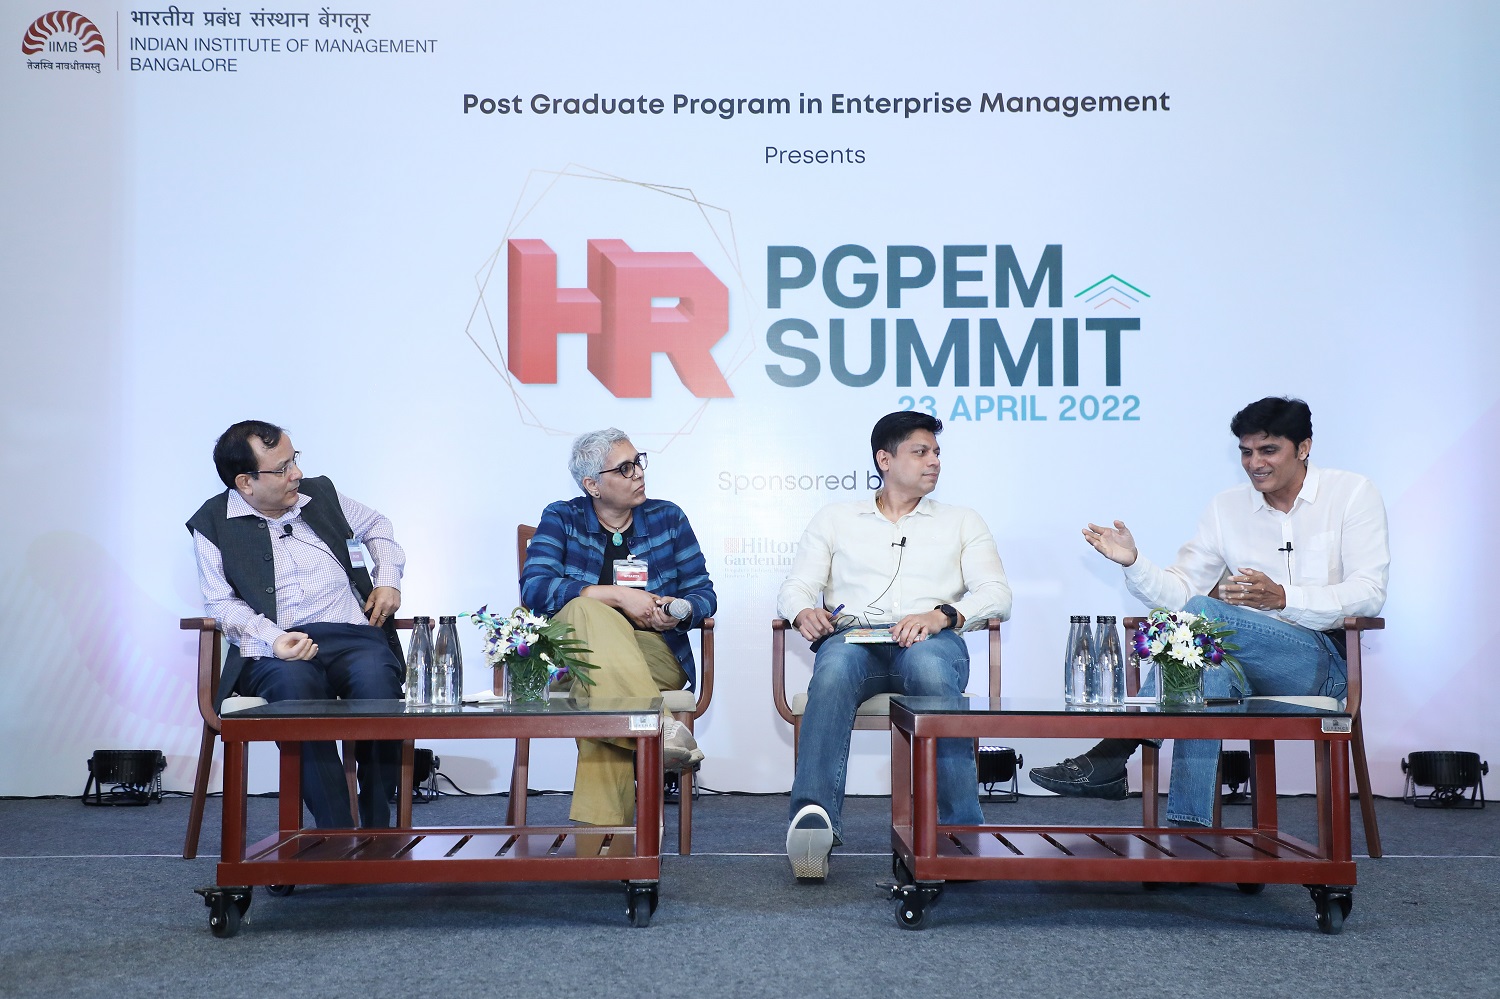 Satish Venkatachaliah, Head - India Hub Operations & Innovation, H&M Group, speaks at the panel discussion on ‘Brittle, Anxious, Non-linear, Incomprehensible - an insight into next ten years of HR’ at the HR Summit. (L-R) Dr. Gopal Mahapatra, faculty from the Organizational Behavior & Human Resources Management area, IIMB; Sunitha Lal, CHRO - Ather; and Govindraj MK, VP-HR, Flipkart and Satish Venkatachaliah.